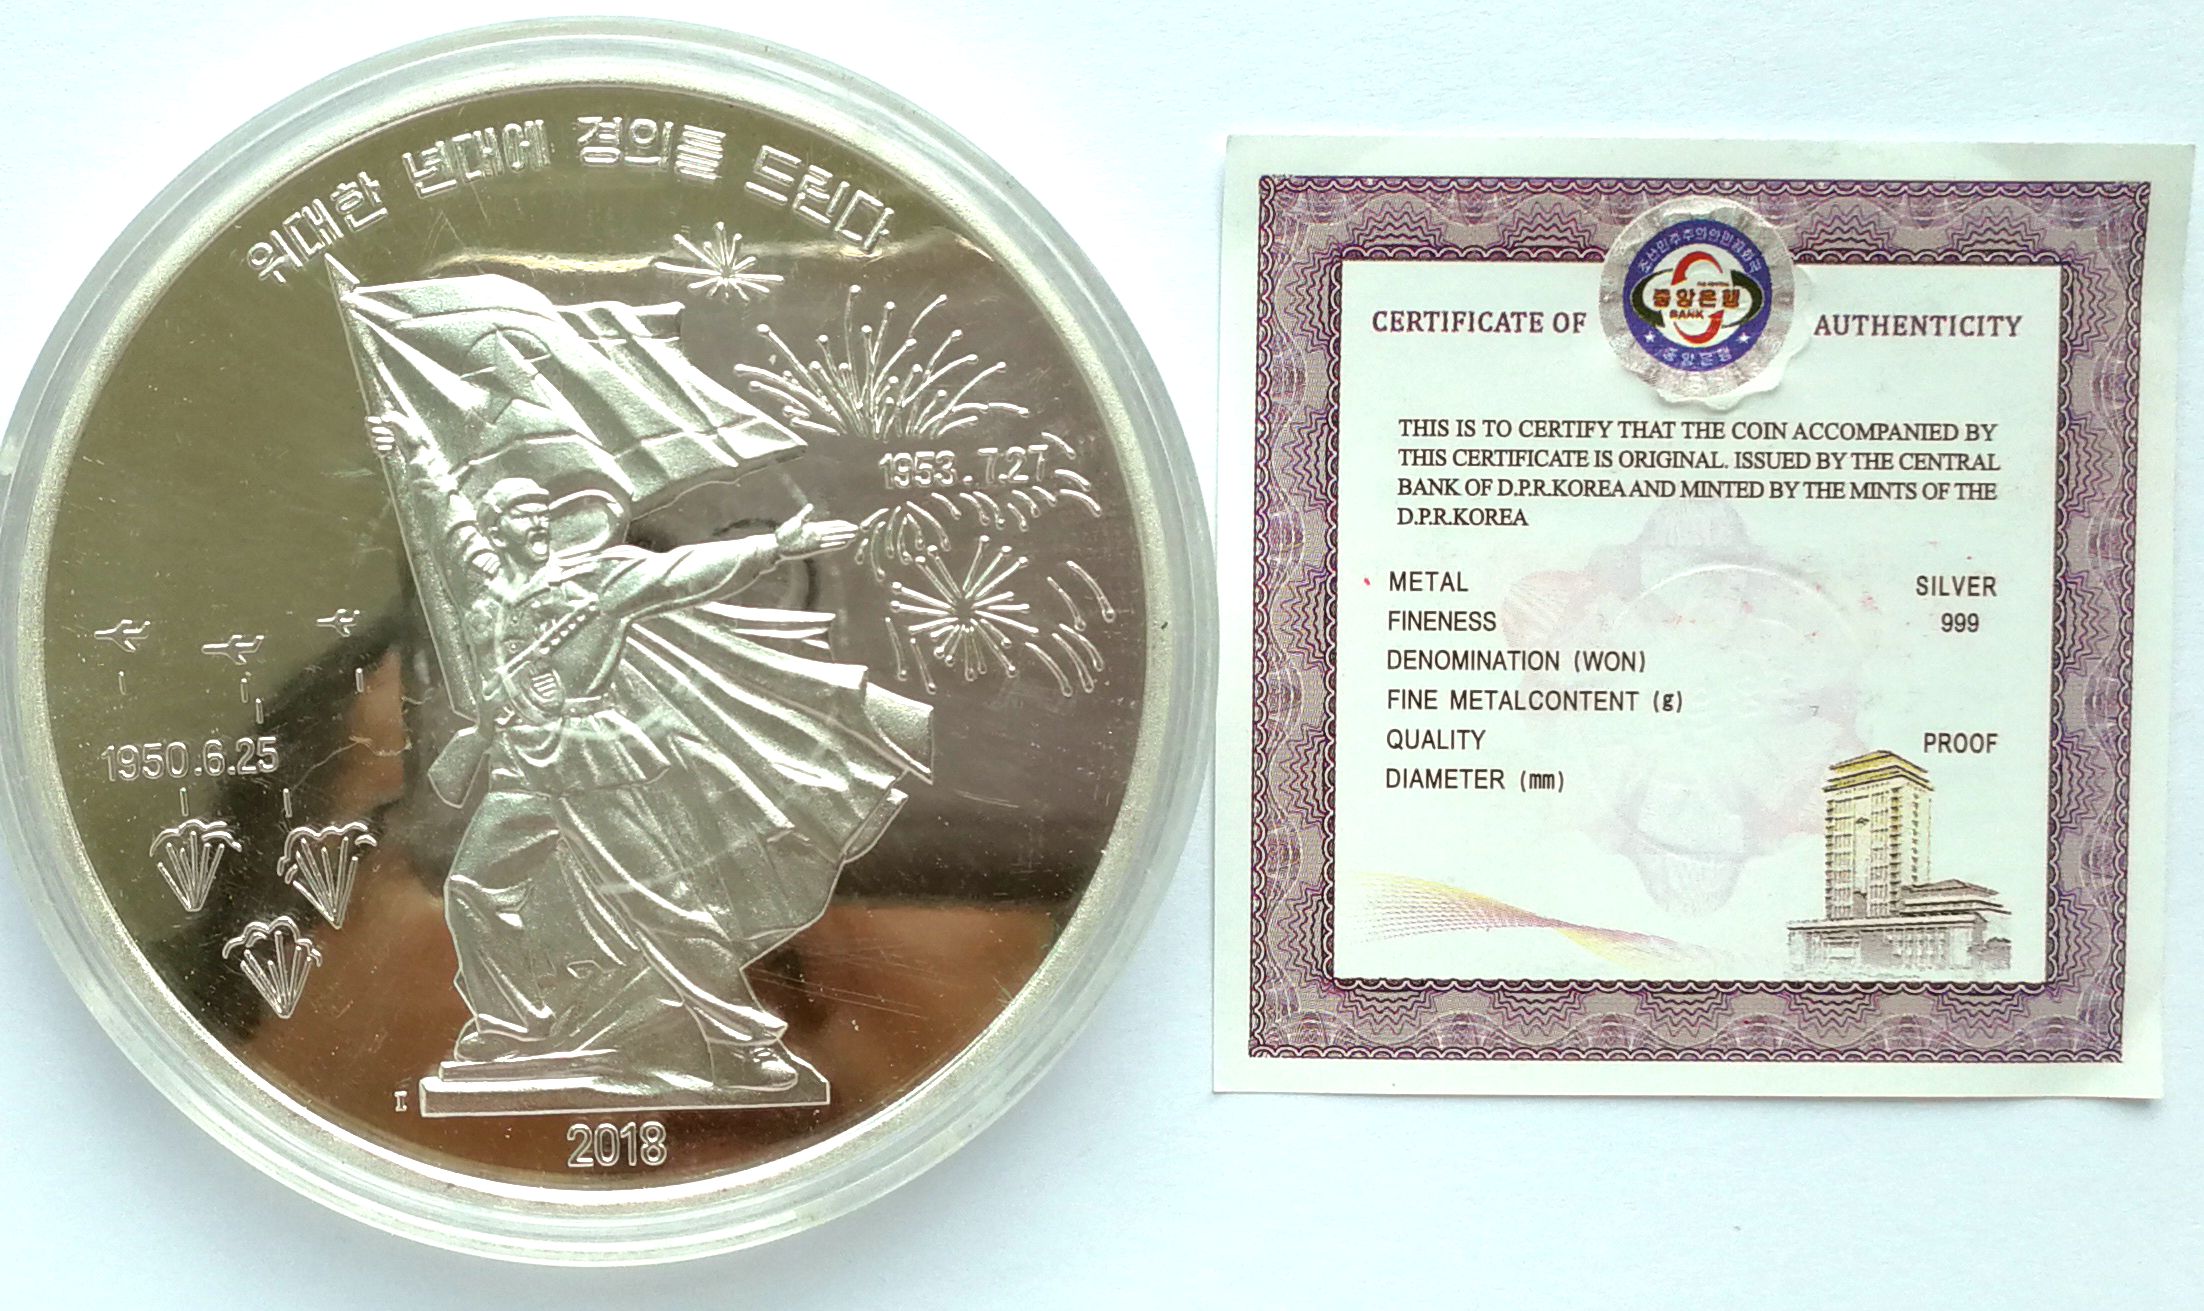 L3568, (Sold out ) "Korean War 65th Years" Korea 5 oz. Proof Silver Coin 2018, Mintage 65 Pcs